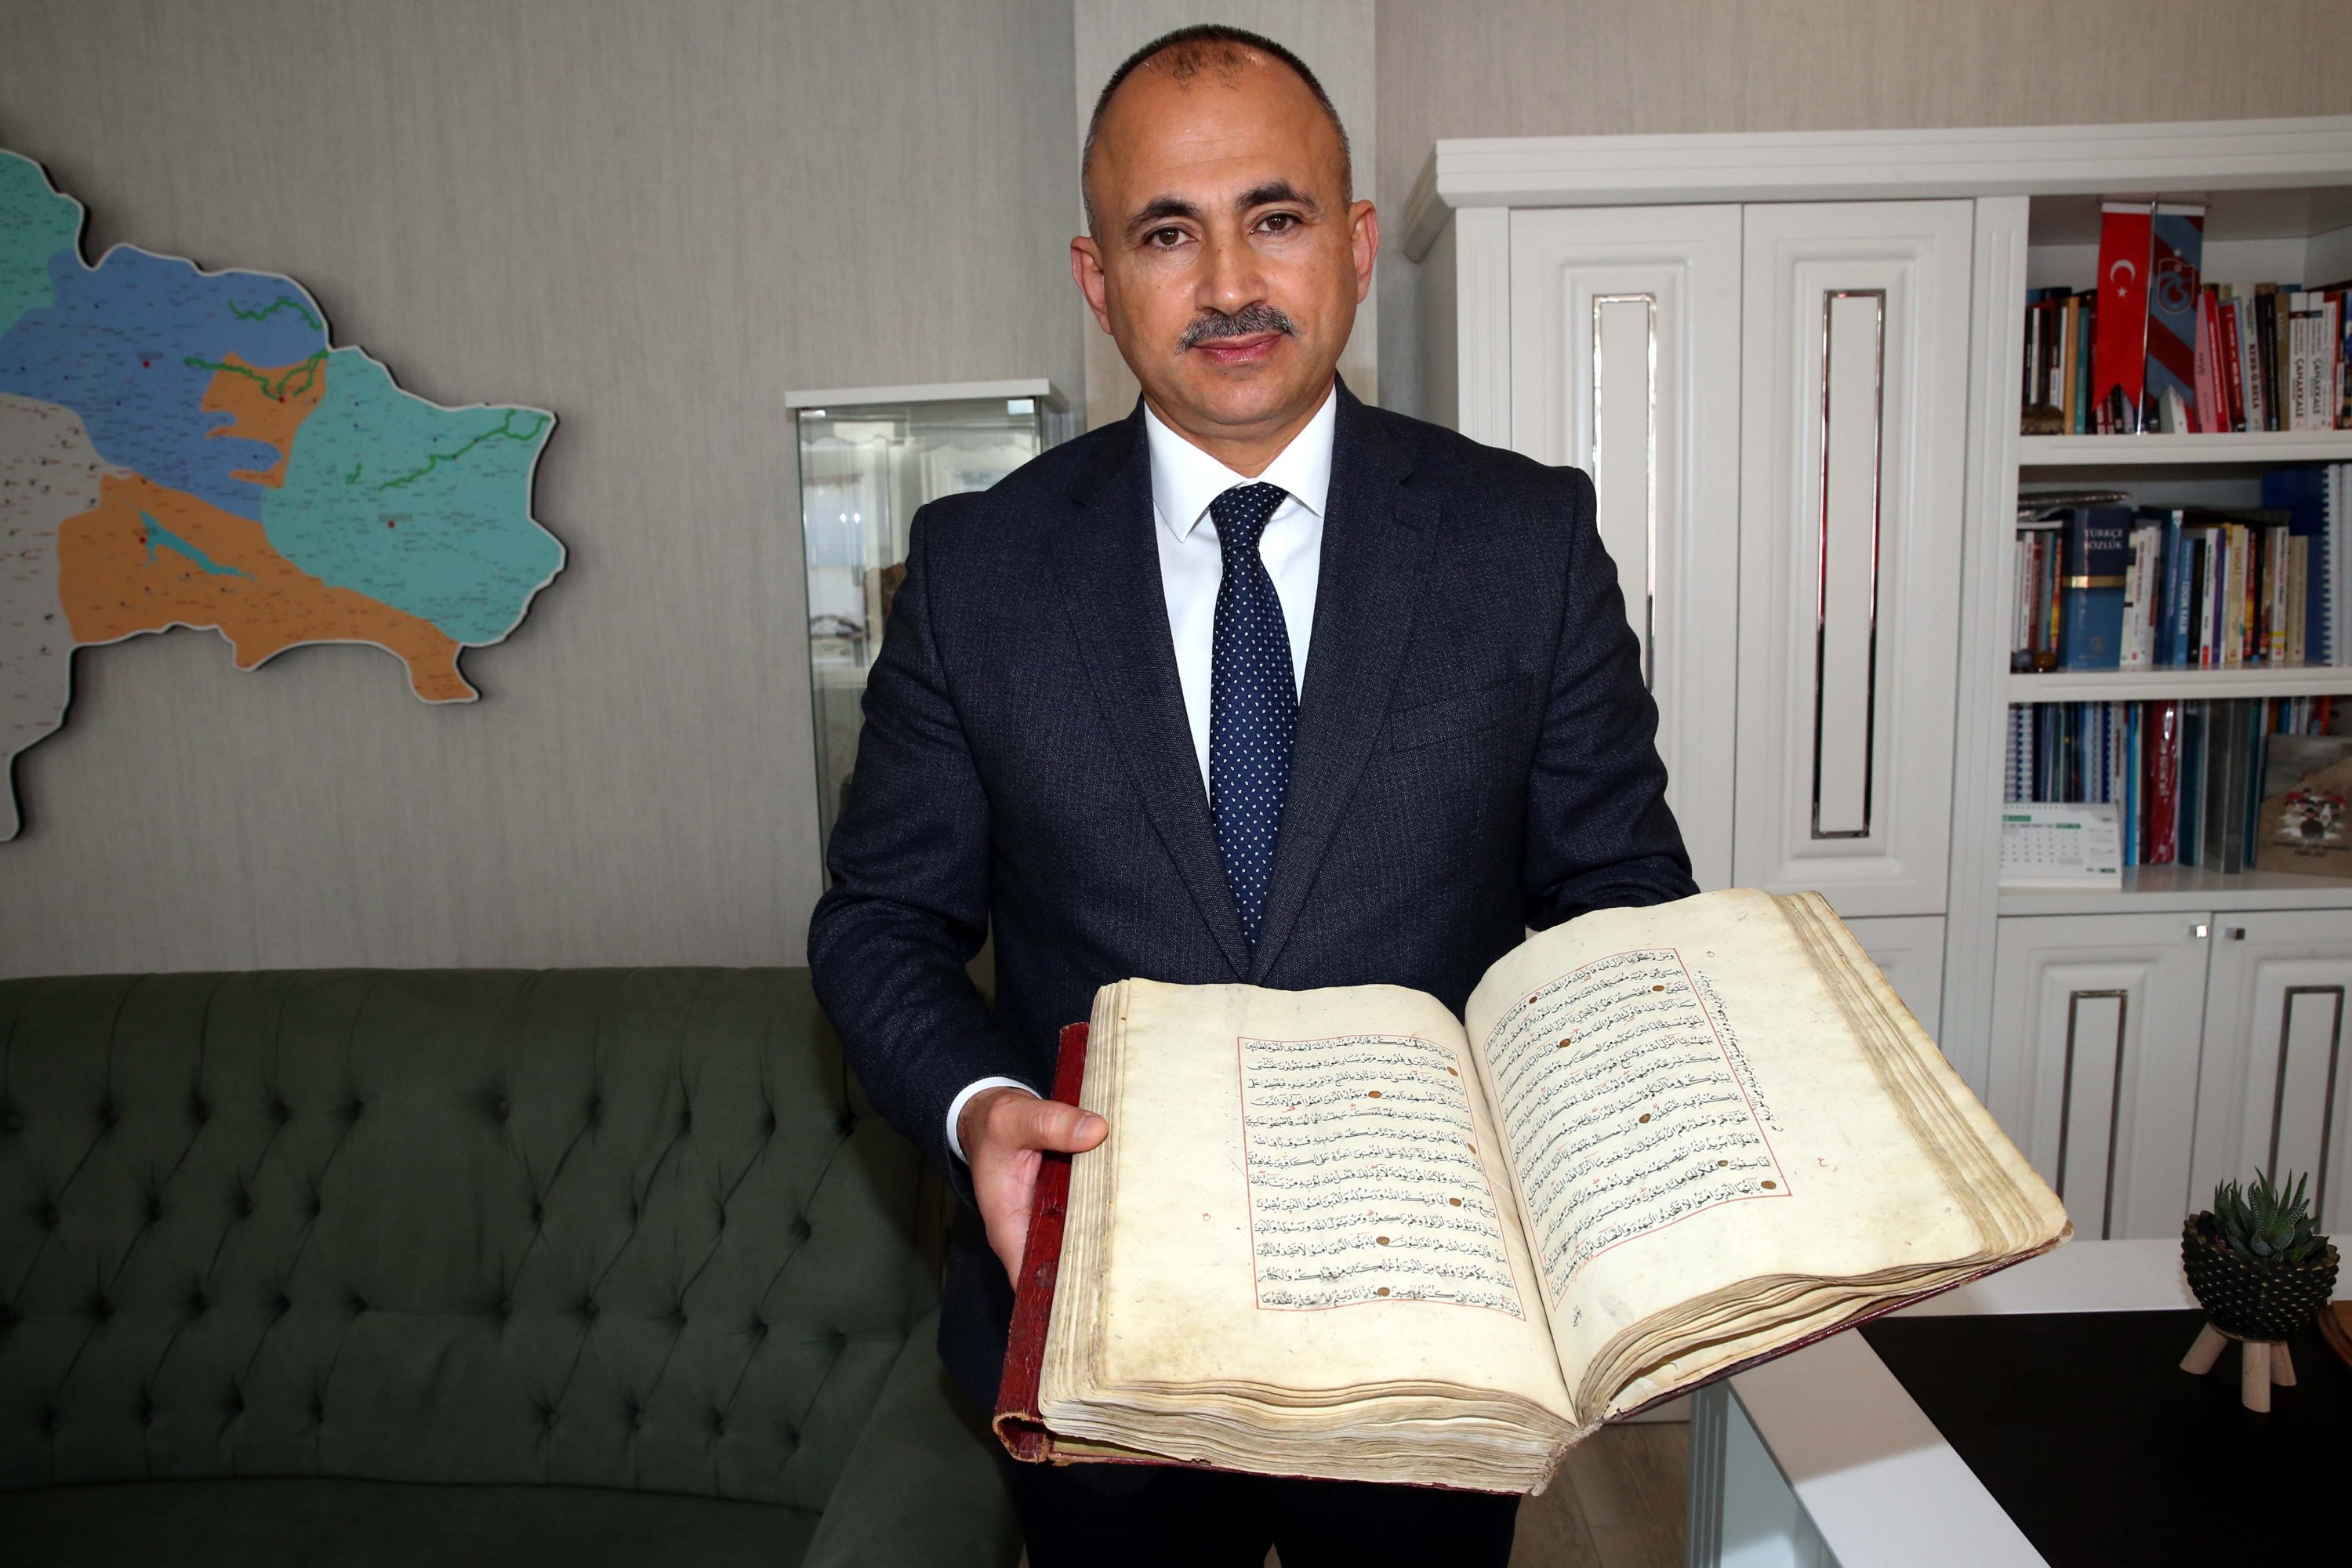 Tokat Provincial Director of National Education Murat Küçükali holds one of the Qurans found in a high school library in Zile district, Tokat province, Turkey, Dec. 3, 2021. (AA Photo)